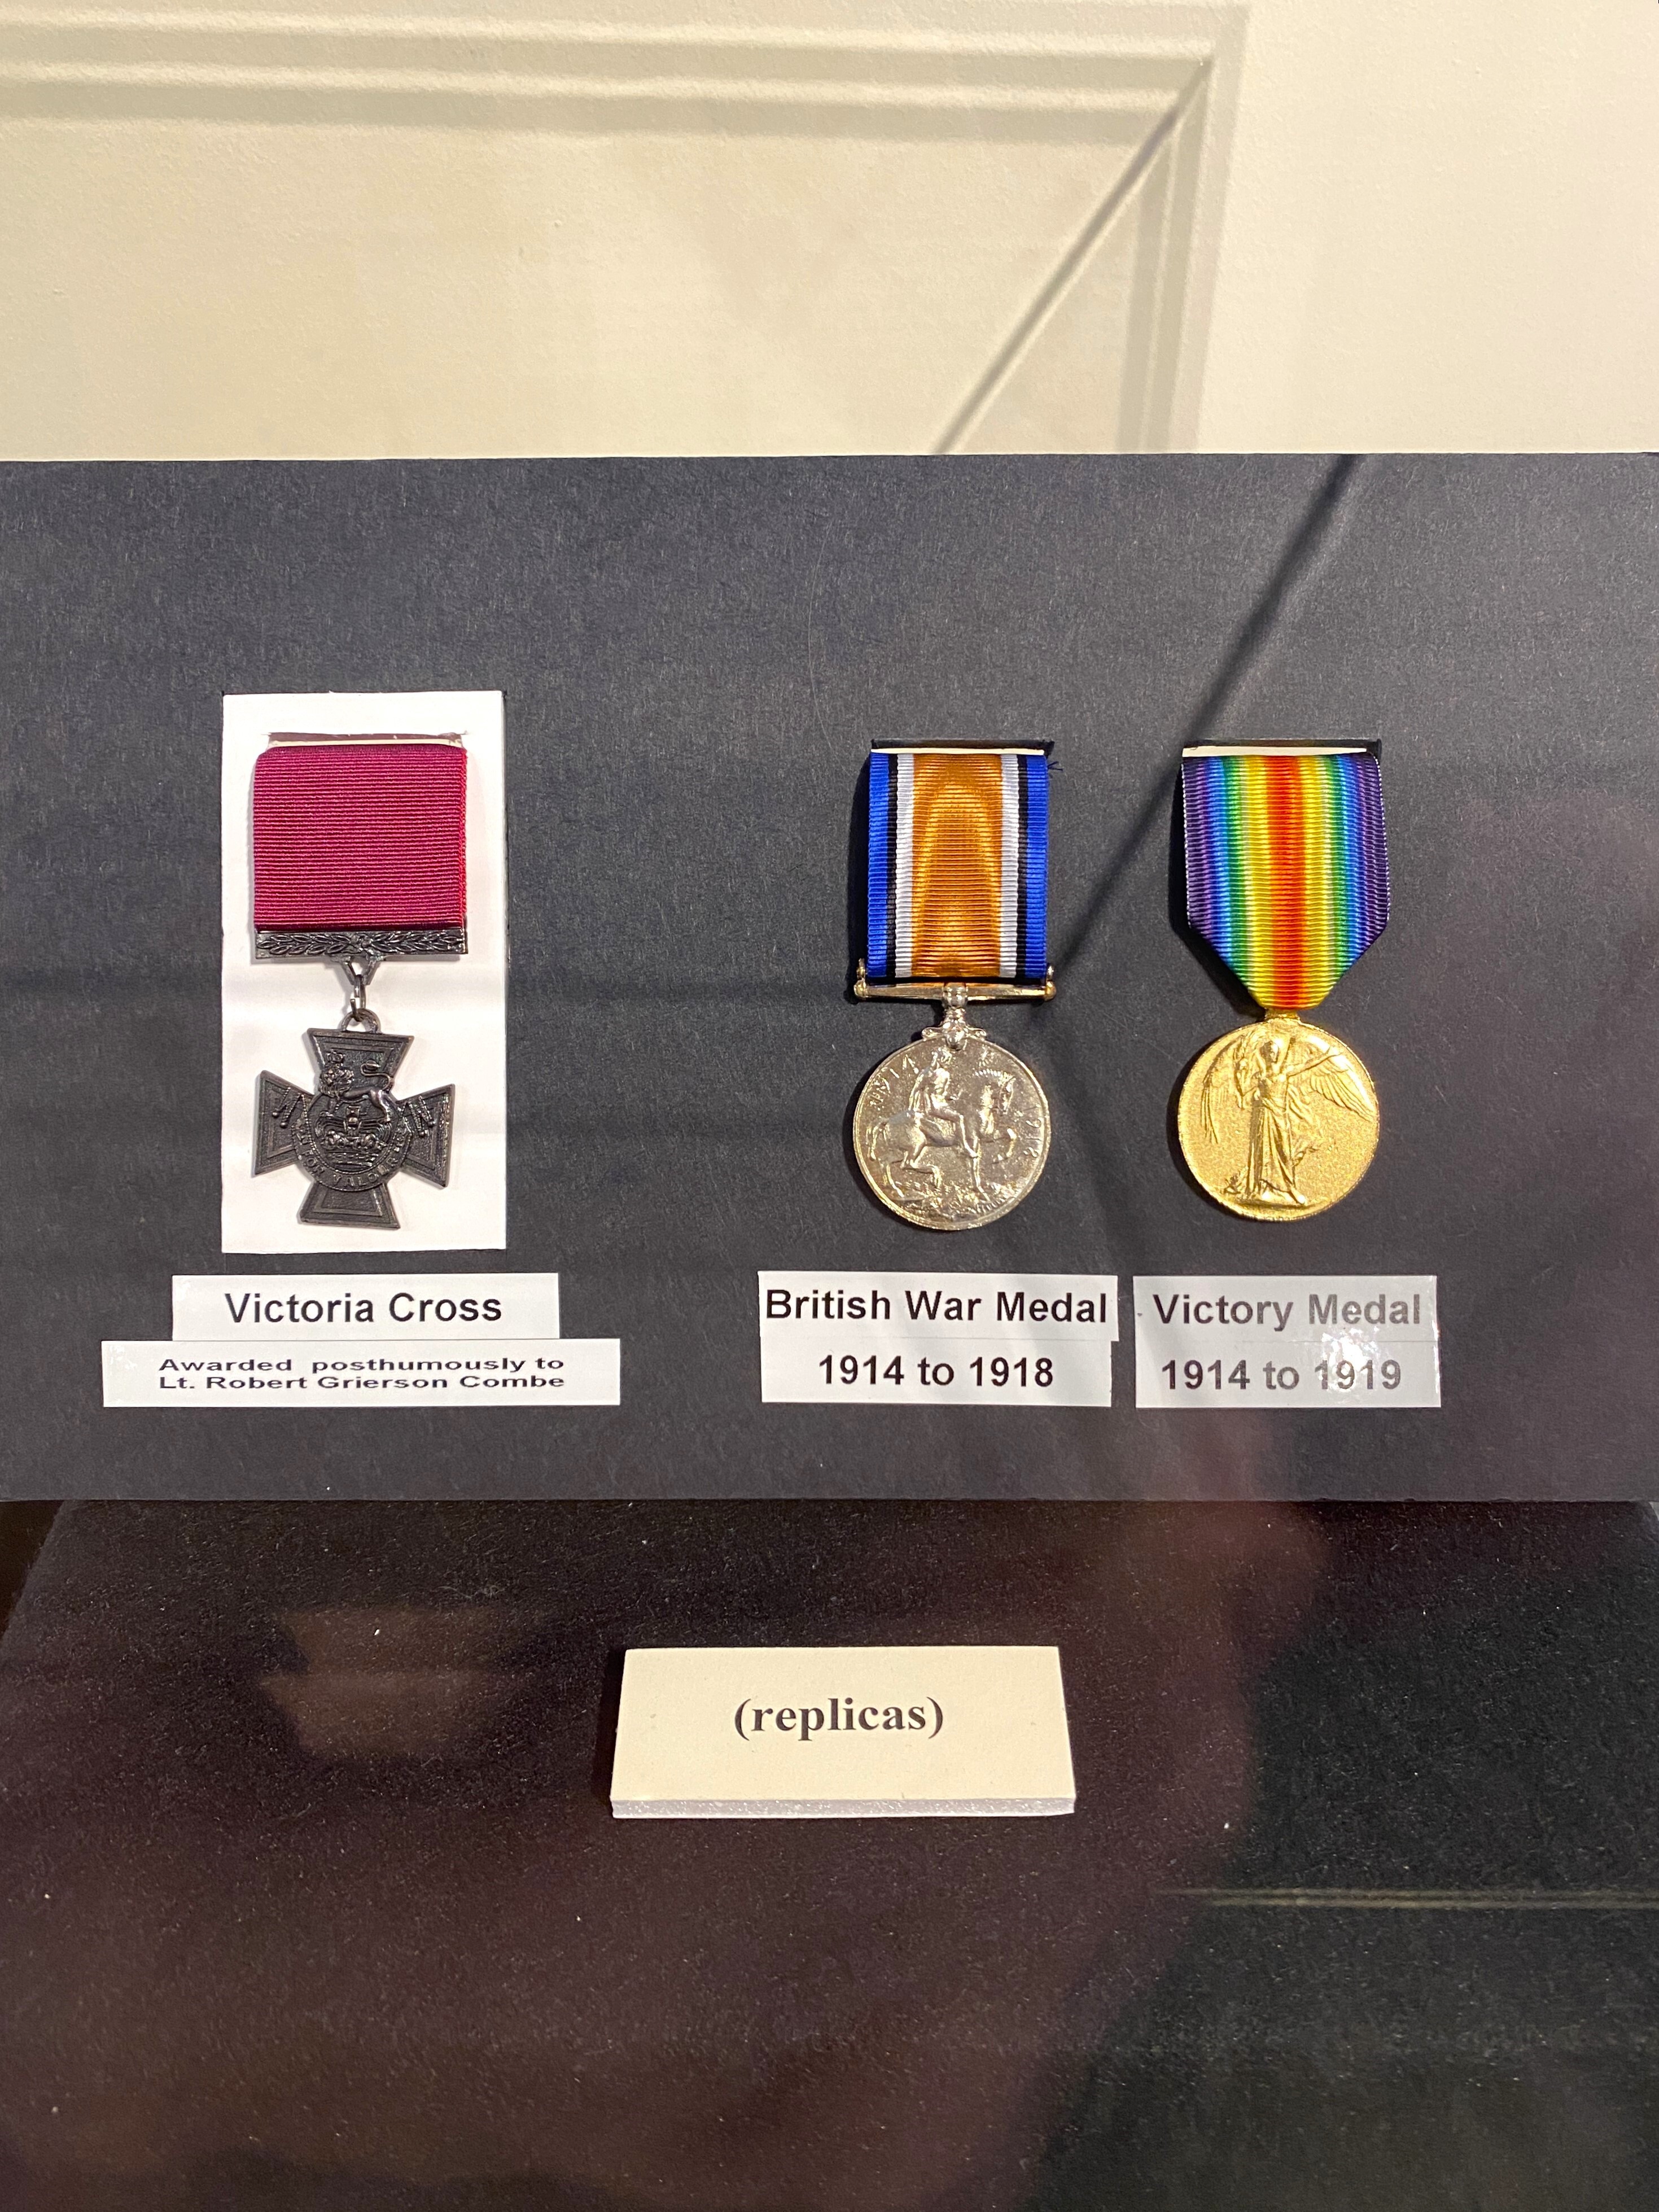 Replicas of the Victoria Cross, the British War Medal and the Victory Medal